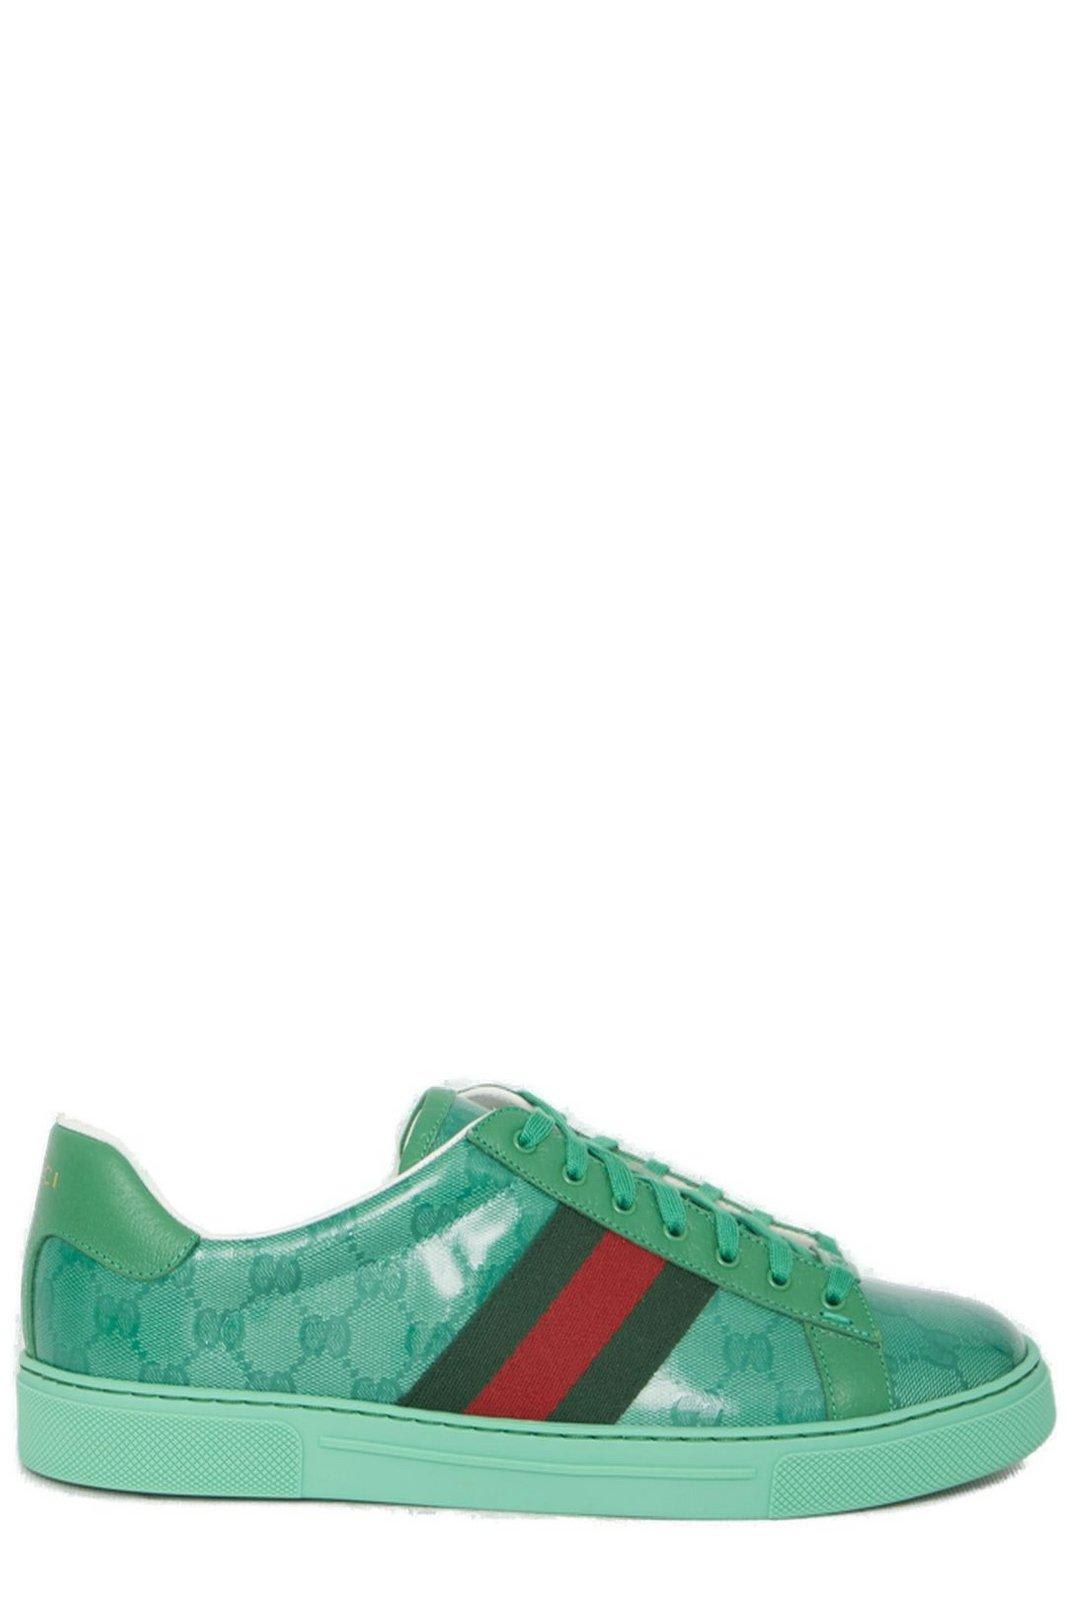 GUCCI ACE GG EMBELLISHED SNEAKERS